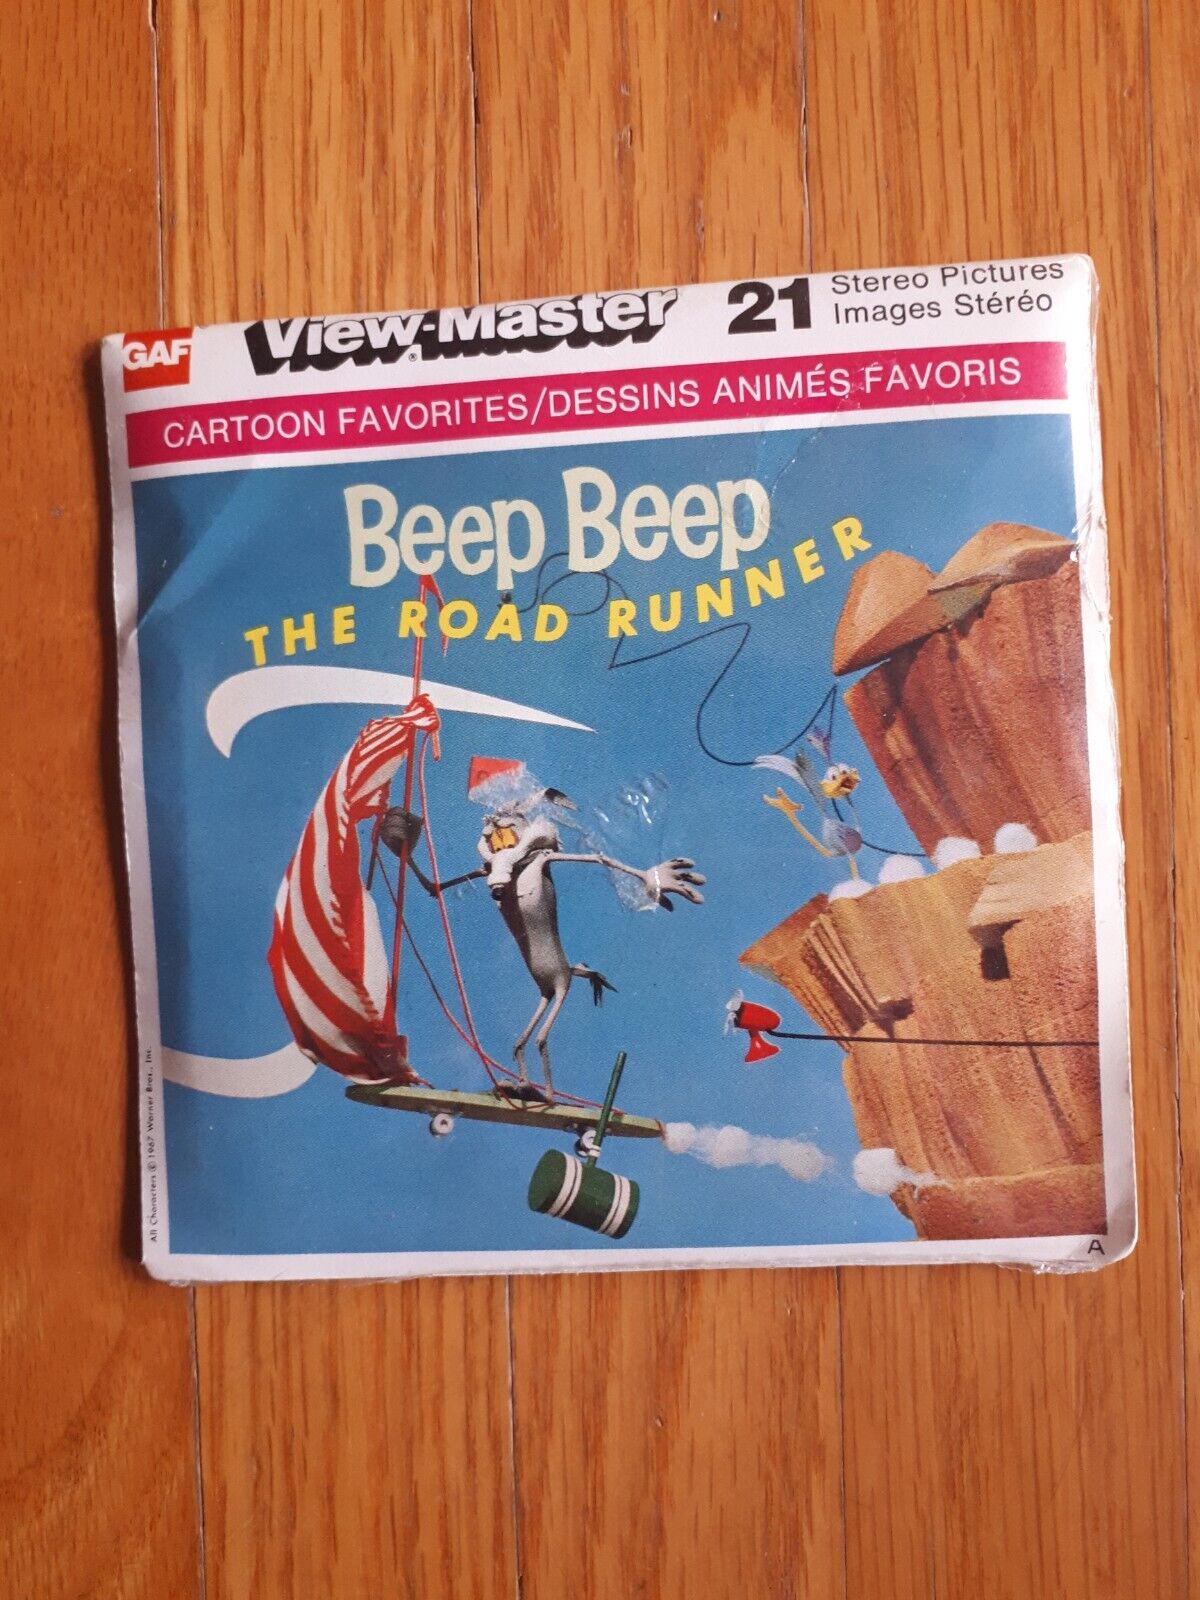 Sealed 1967 Vintage Looney Tunes Wile E Coyote Beep Road Runner Viewmaster GAF